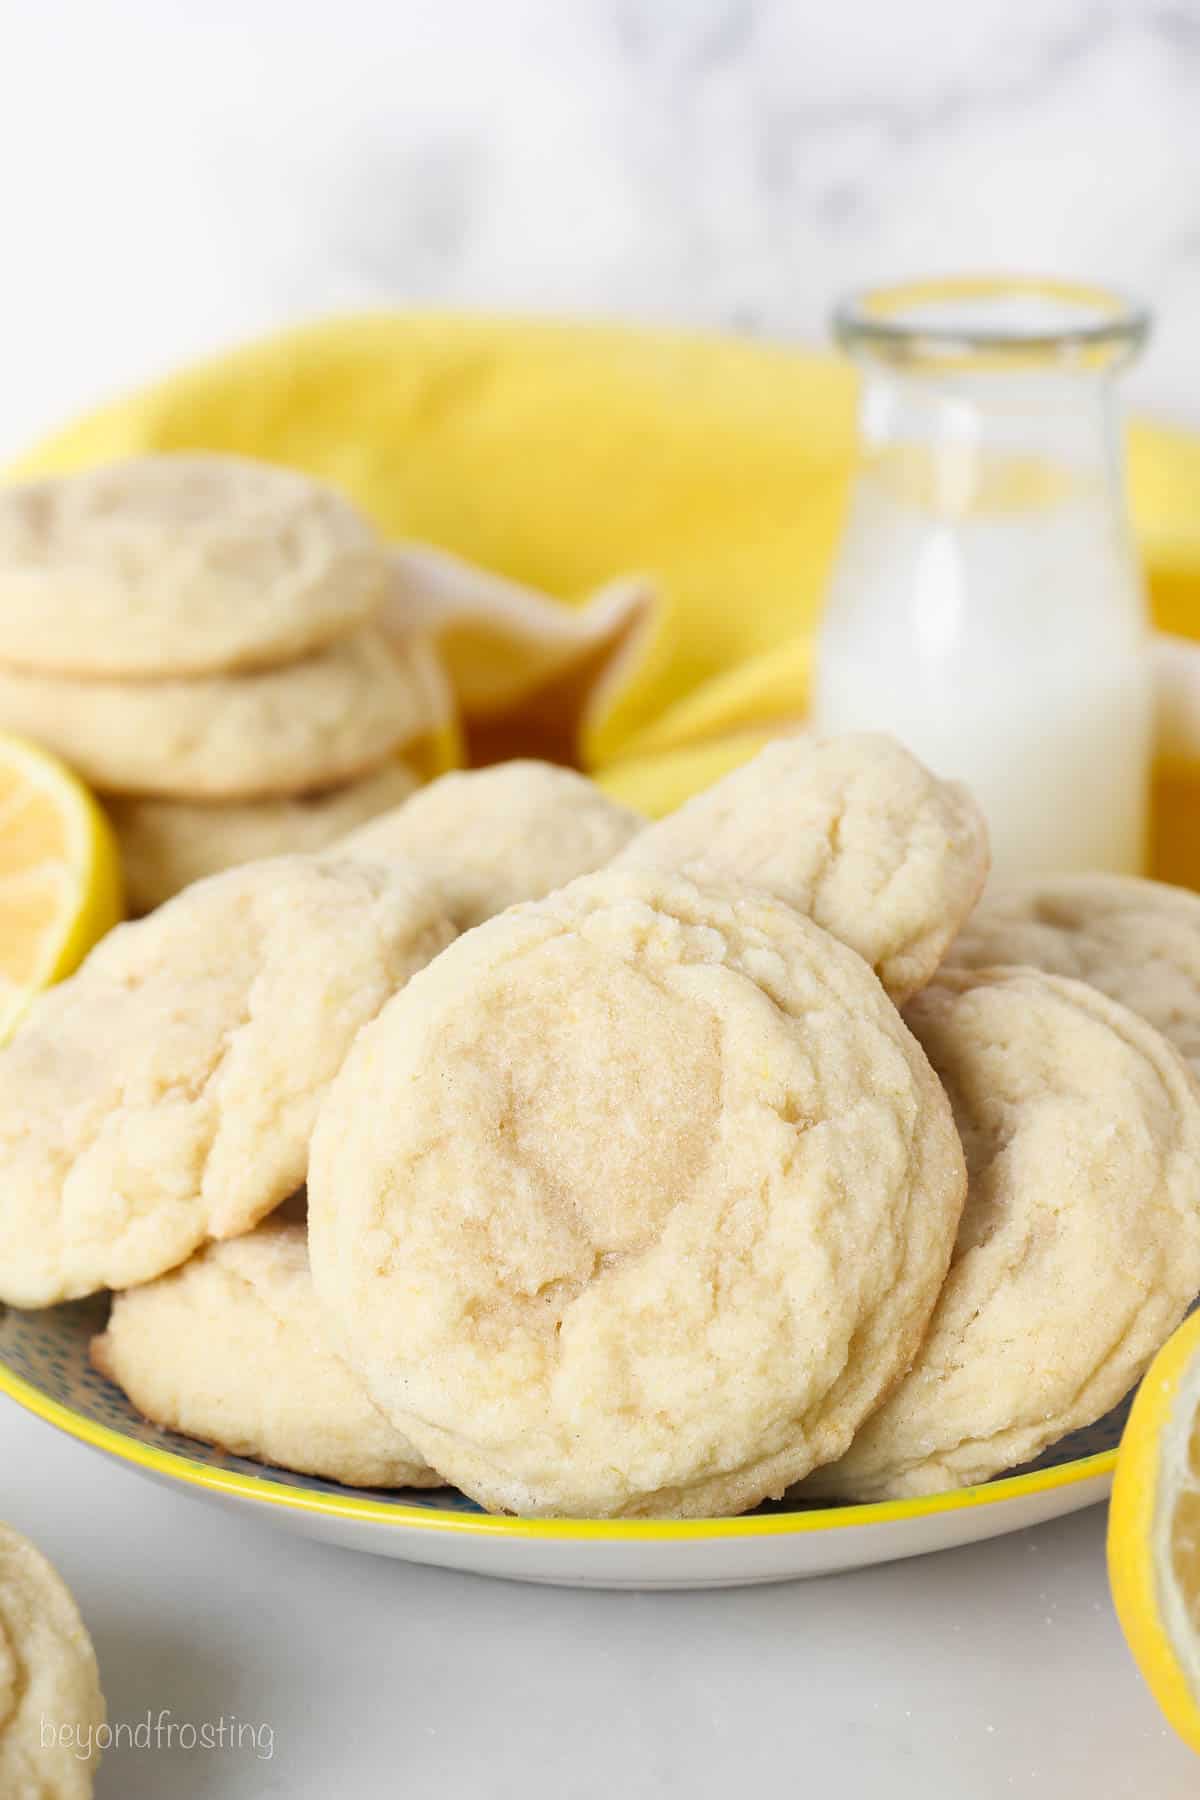 Lemon sugar cookies on a plate with a glass of milk, lemons, and more cookies in the background.